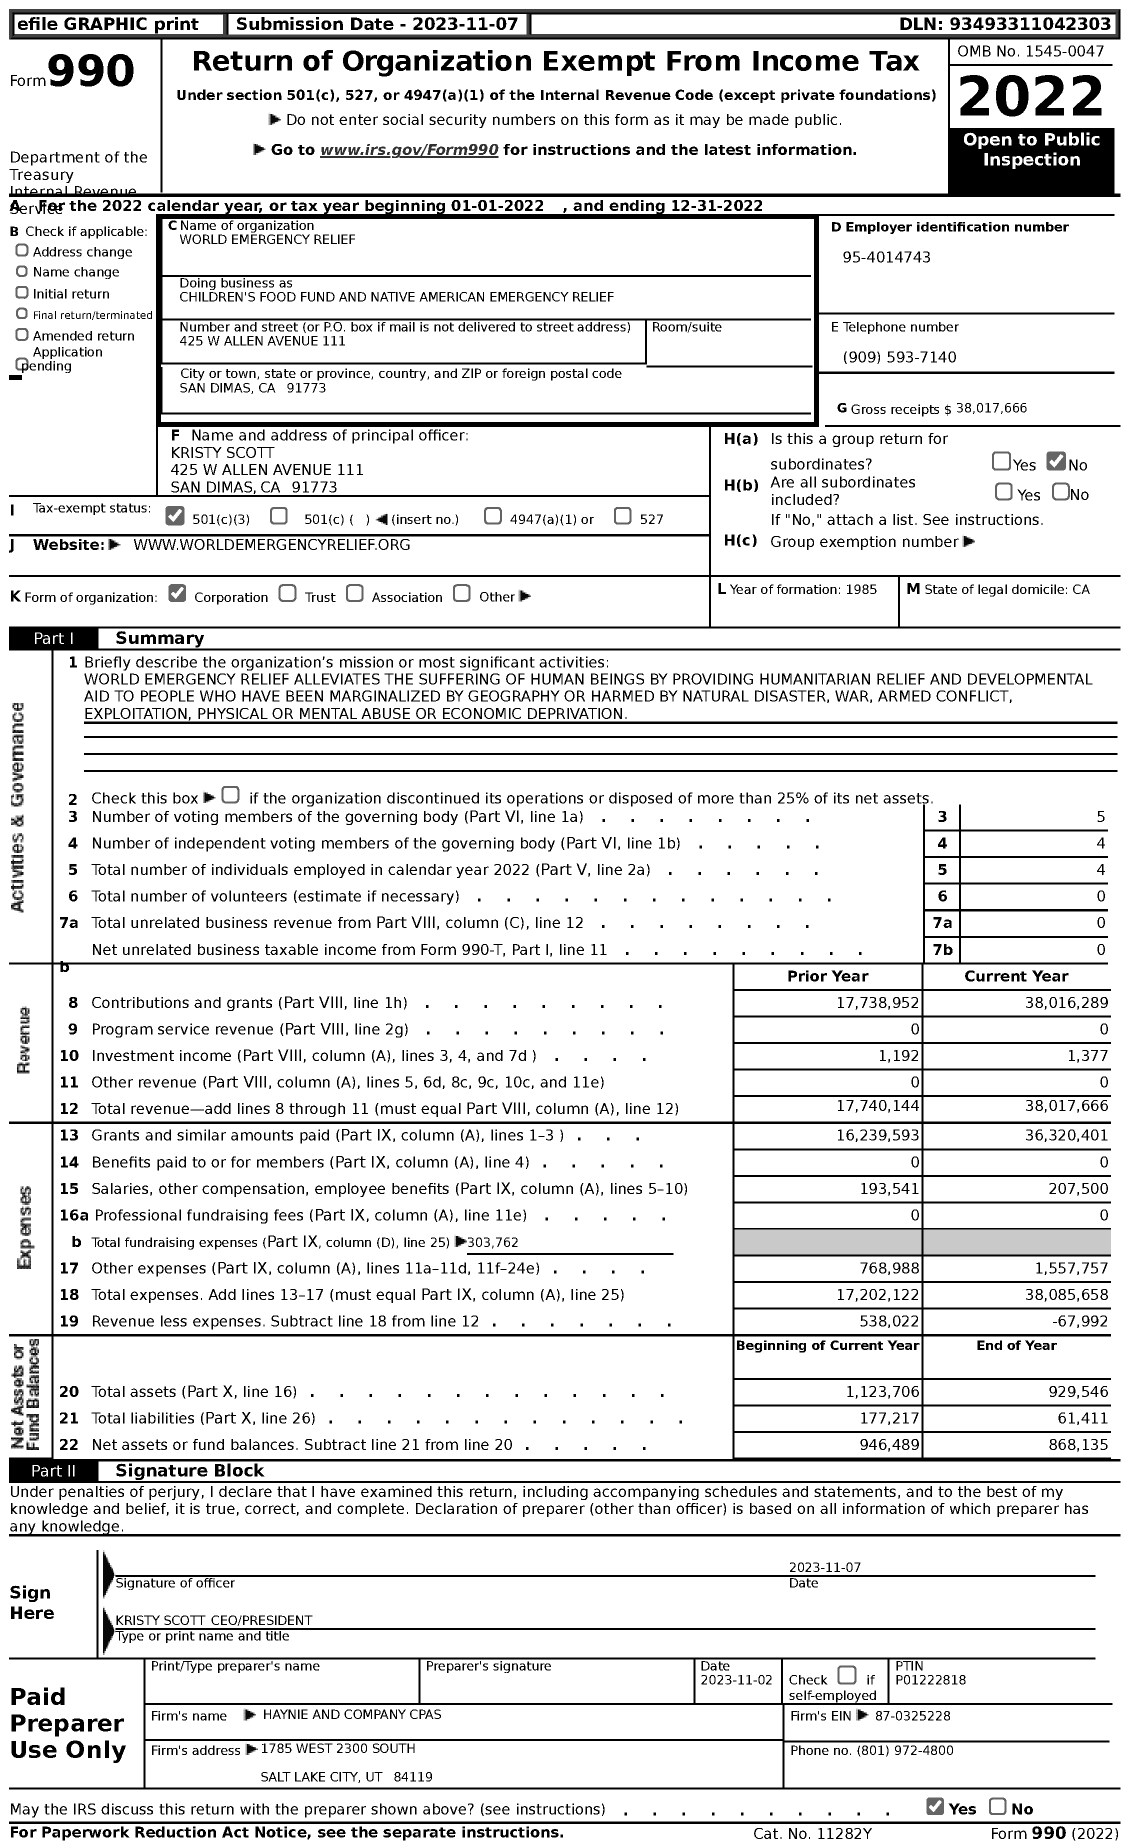 Image of first page of 2022 Form 990 for Children's Food Fund and Native American Emergency Relief (WER)